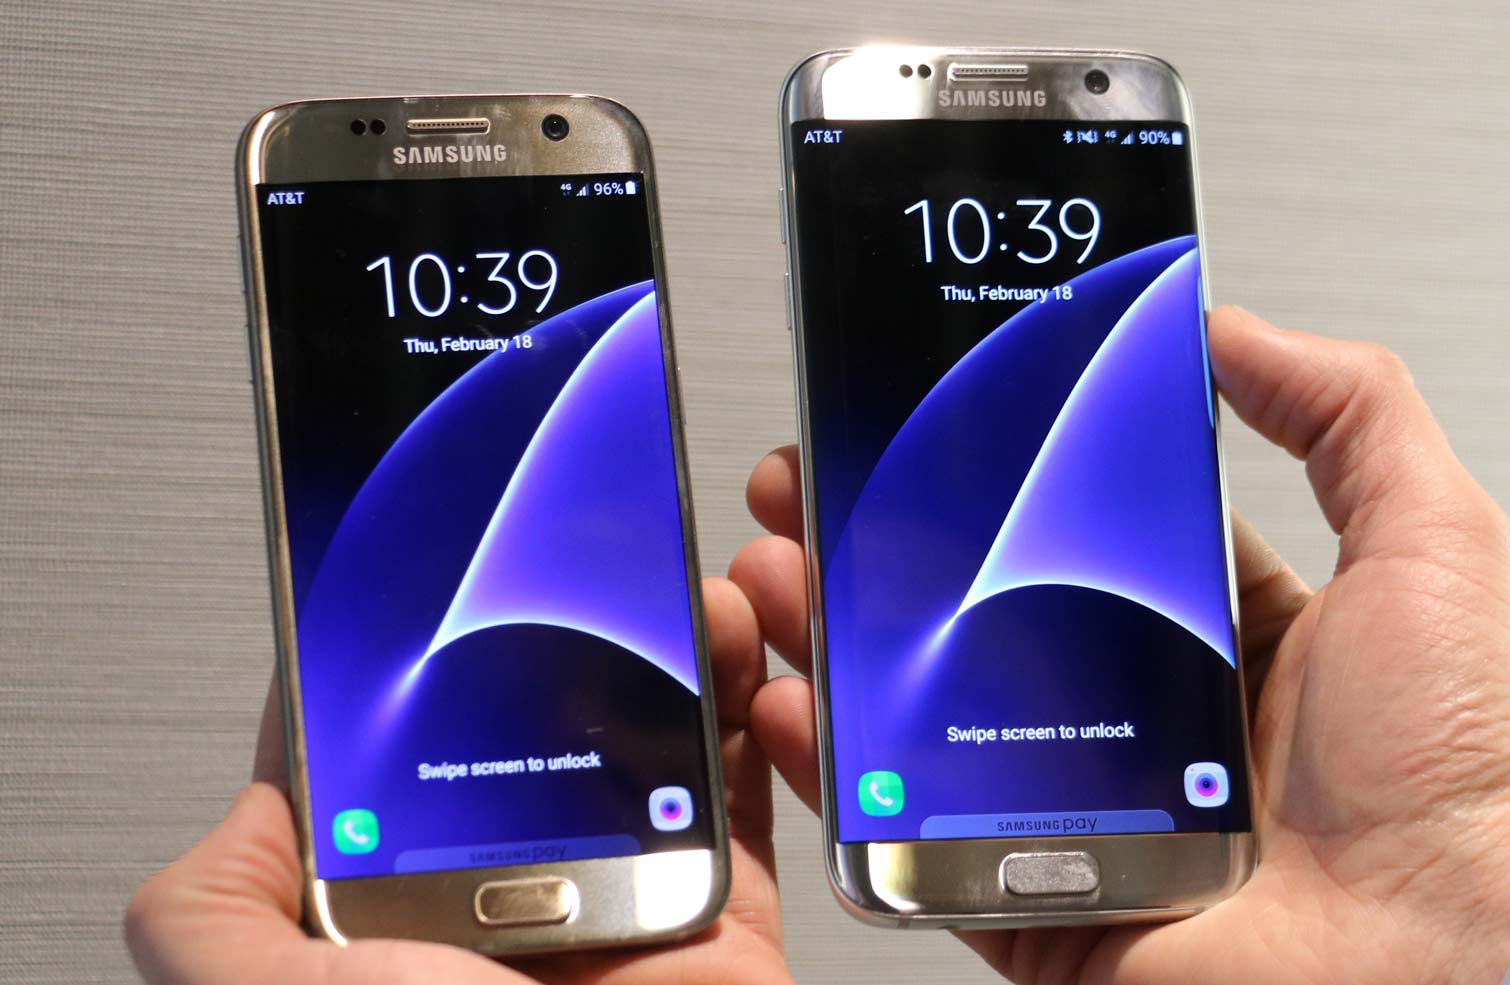 St inrichting heb vertrouwen Galaxy S7 vs S7 Edge: Which One's Right for You? | Tom's Guide